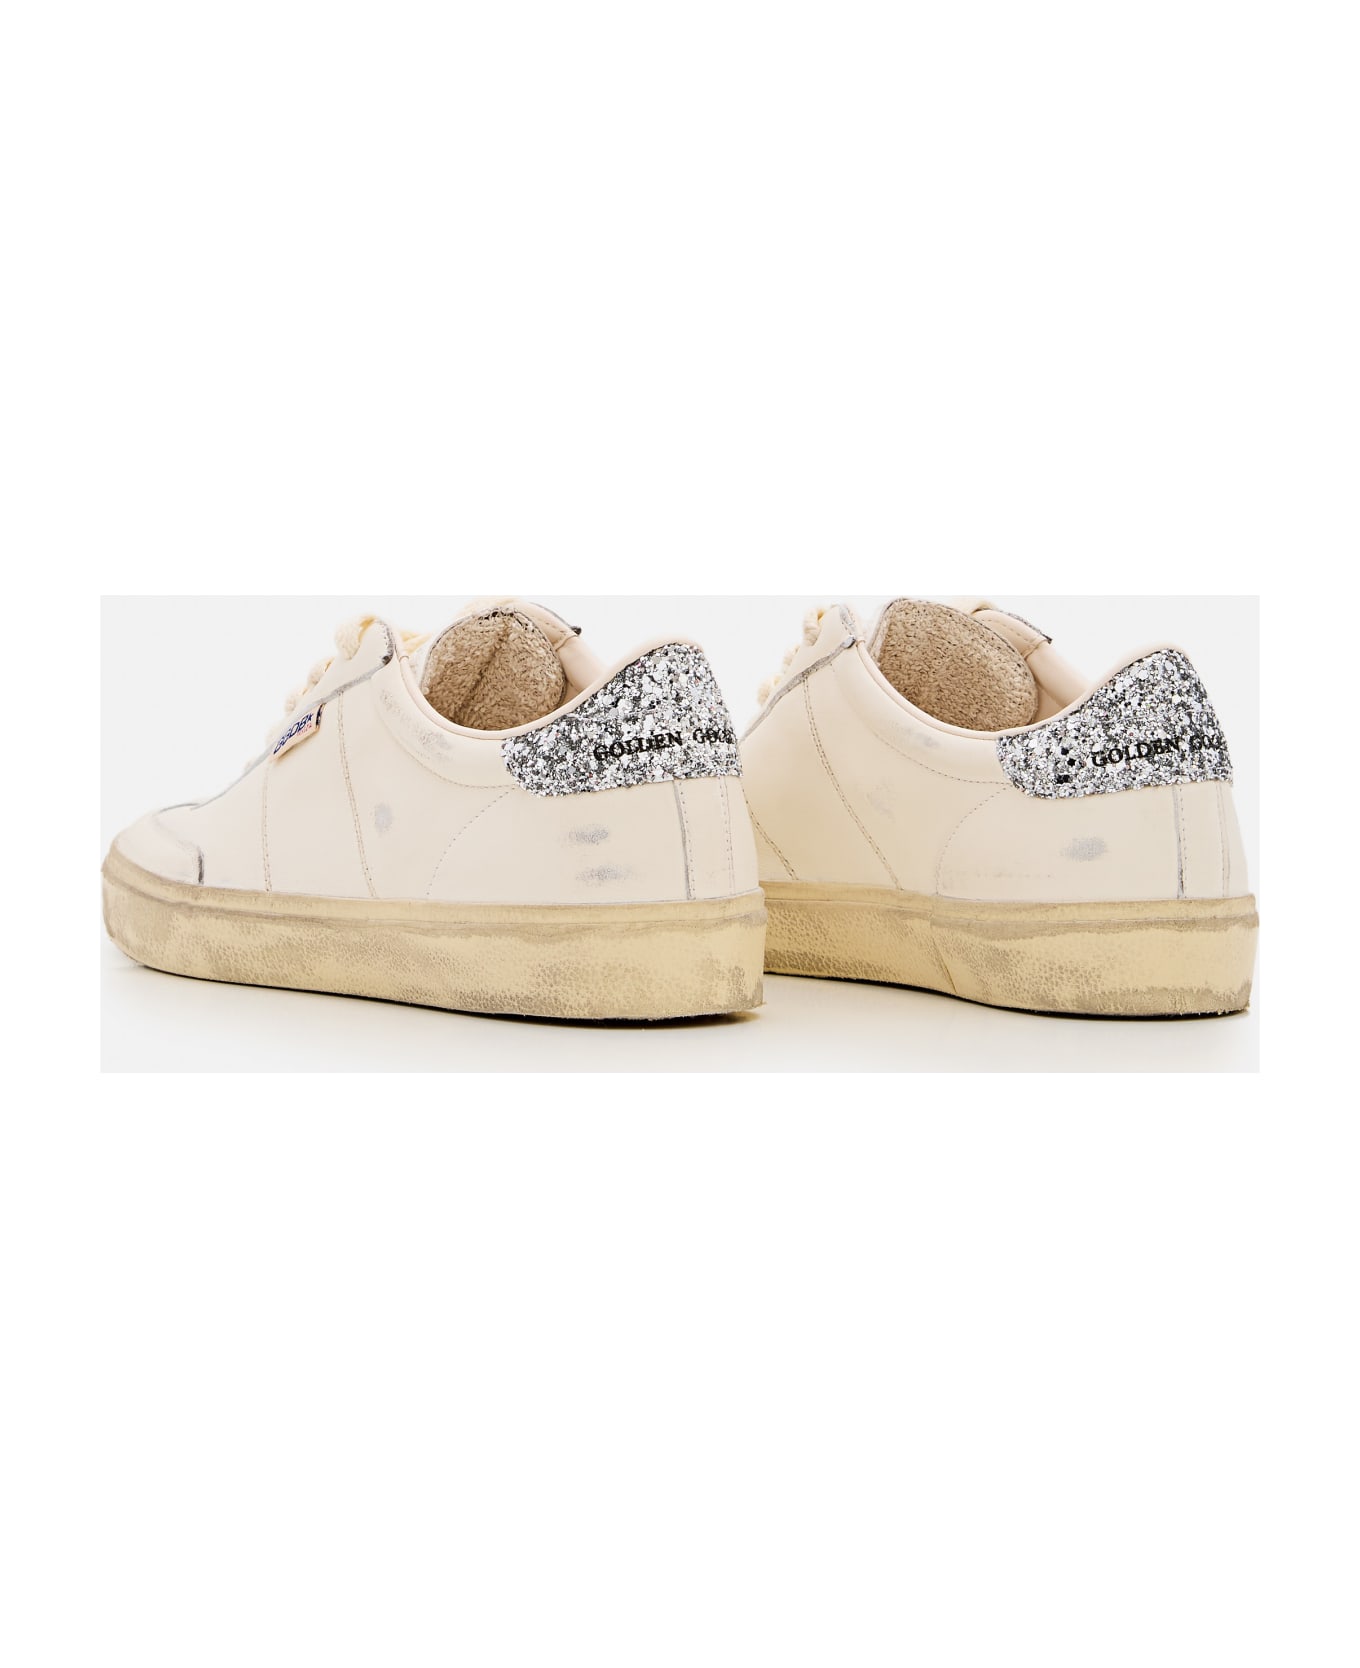 Golden Goose Soul Star Distressed Glittered Lace-up Sneakers - White/Silver